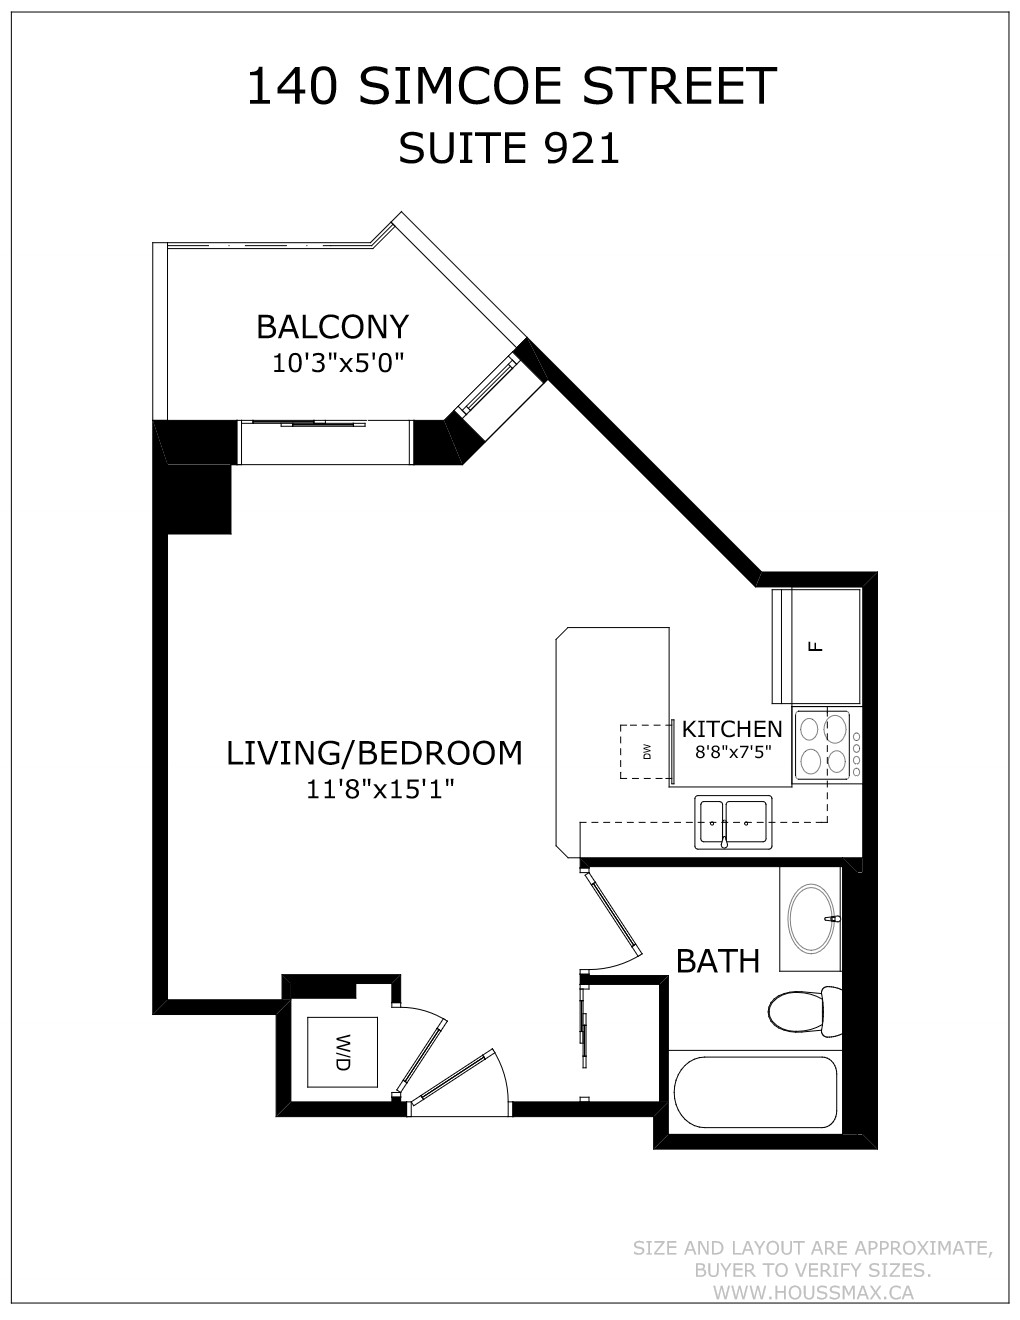 Floor plans and layout for 140 Simcoe St E Unit 921